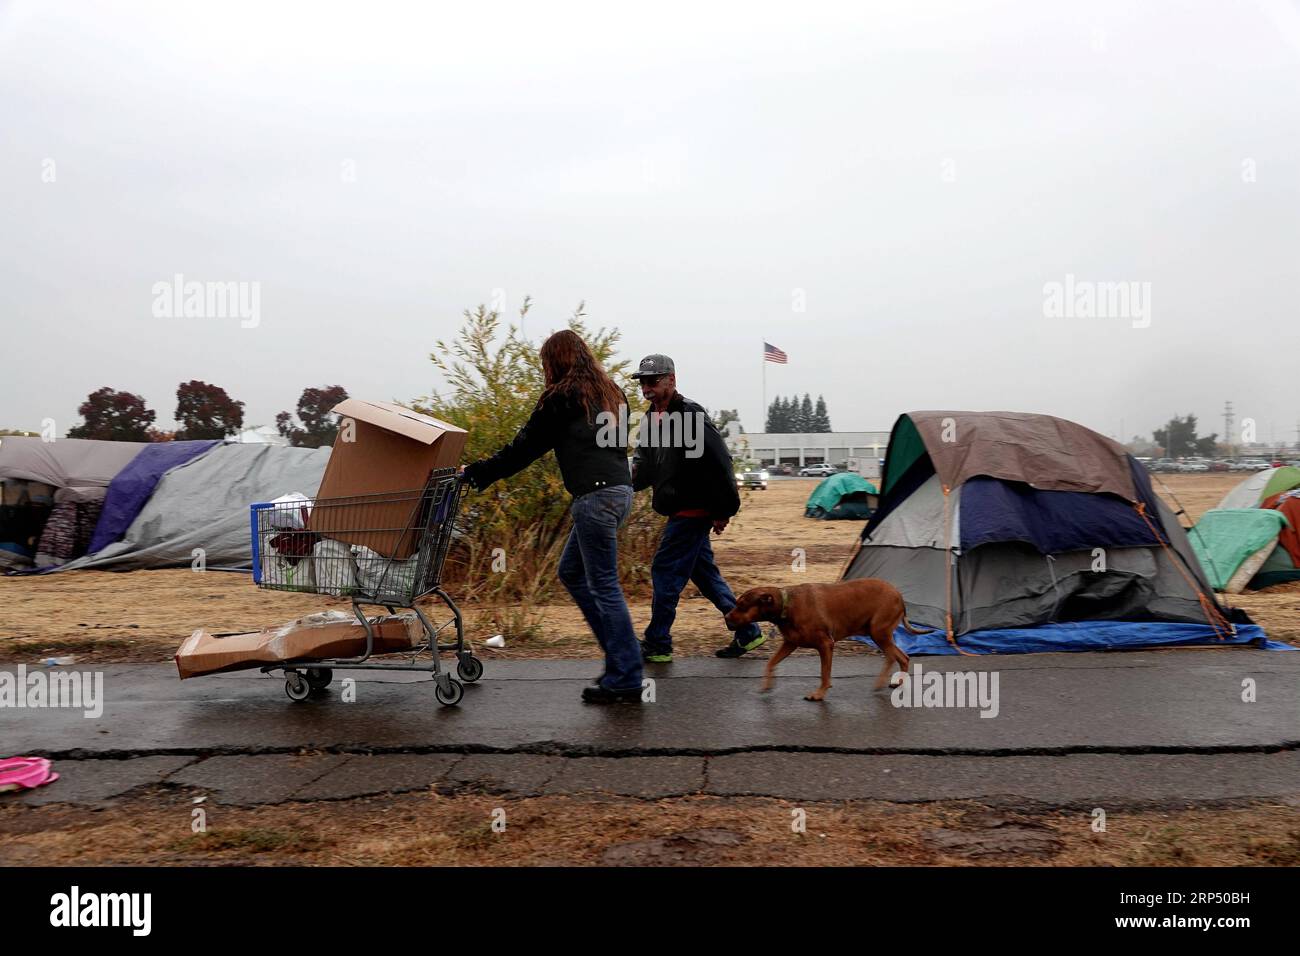 (181122) -- BUTTE, Nov. 22, 2018 (Xinhua) -- Residents walk near the tents at a parking lot in Chico of Butte County, California, the United States, Nov. 21, 2018. Local officials warned that the rain after the wildfire could cause risk of flash floods and mudflows. (Xinhua/Wu Xiaoling)(clq) U.S.-CALIFORNIA-BUTTE-WILDFIRE-RAIN PUBLICATIONxNOTxINxCHN Stock Photo